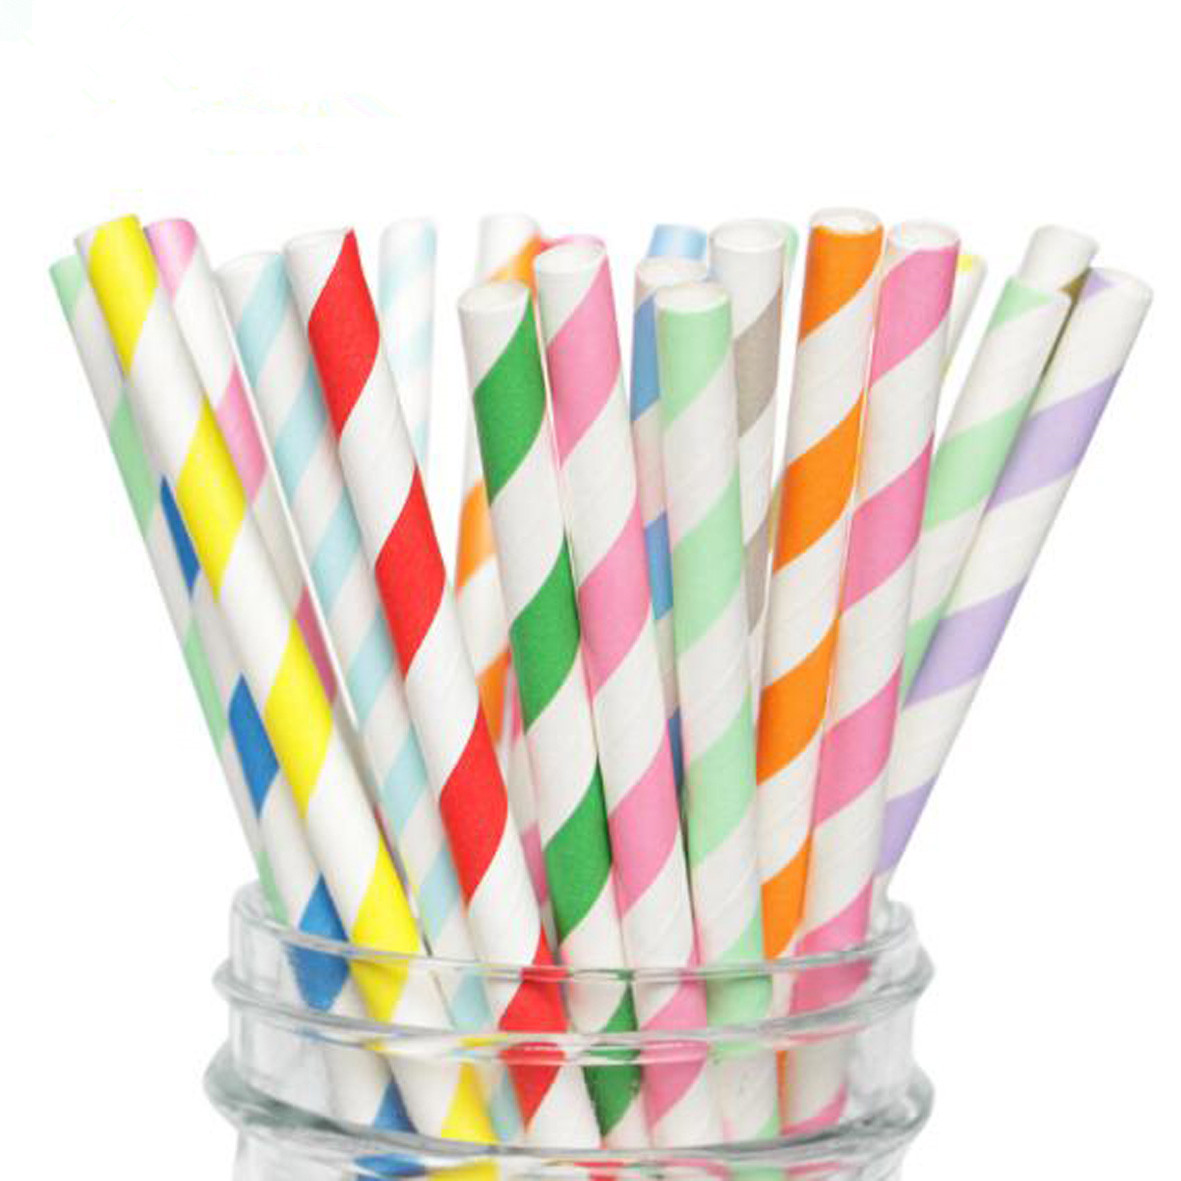 GL-ELY1138 Disposable Biodegradable Paper Straw